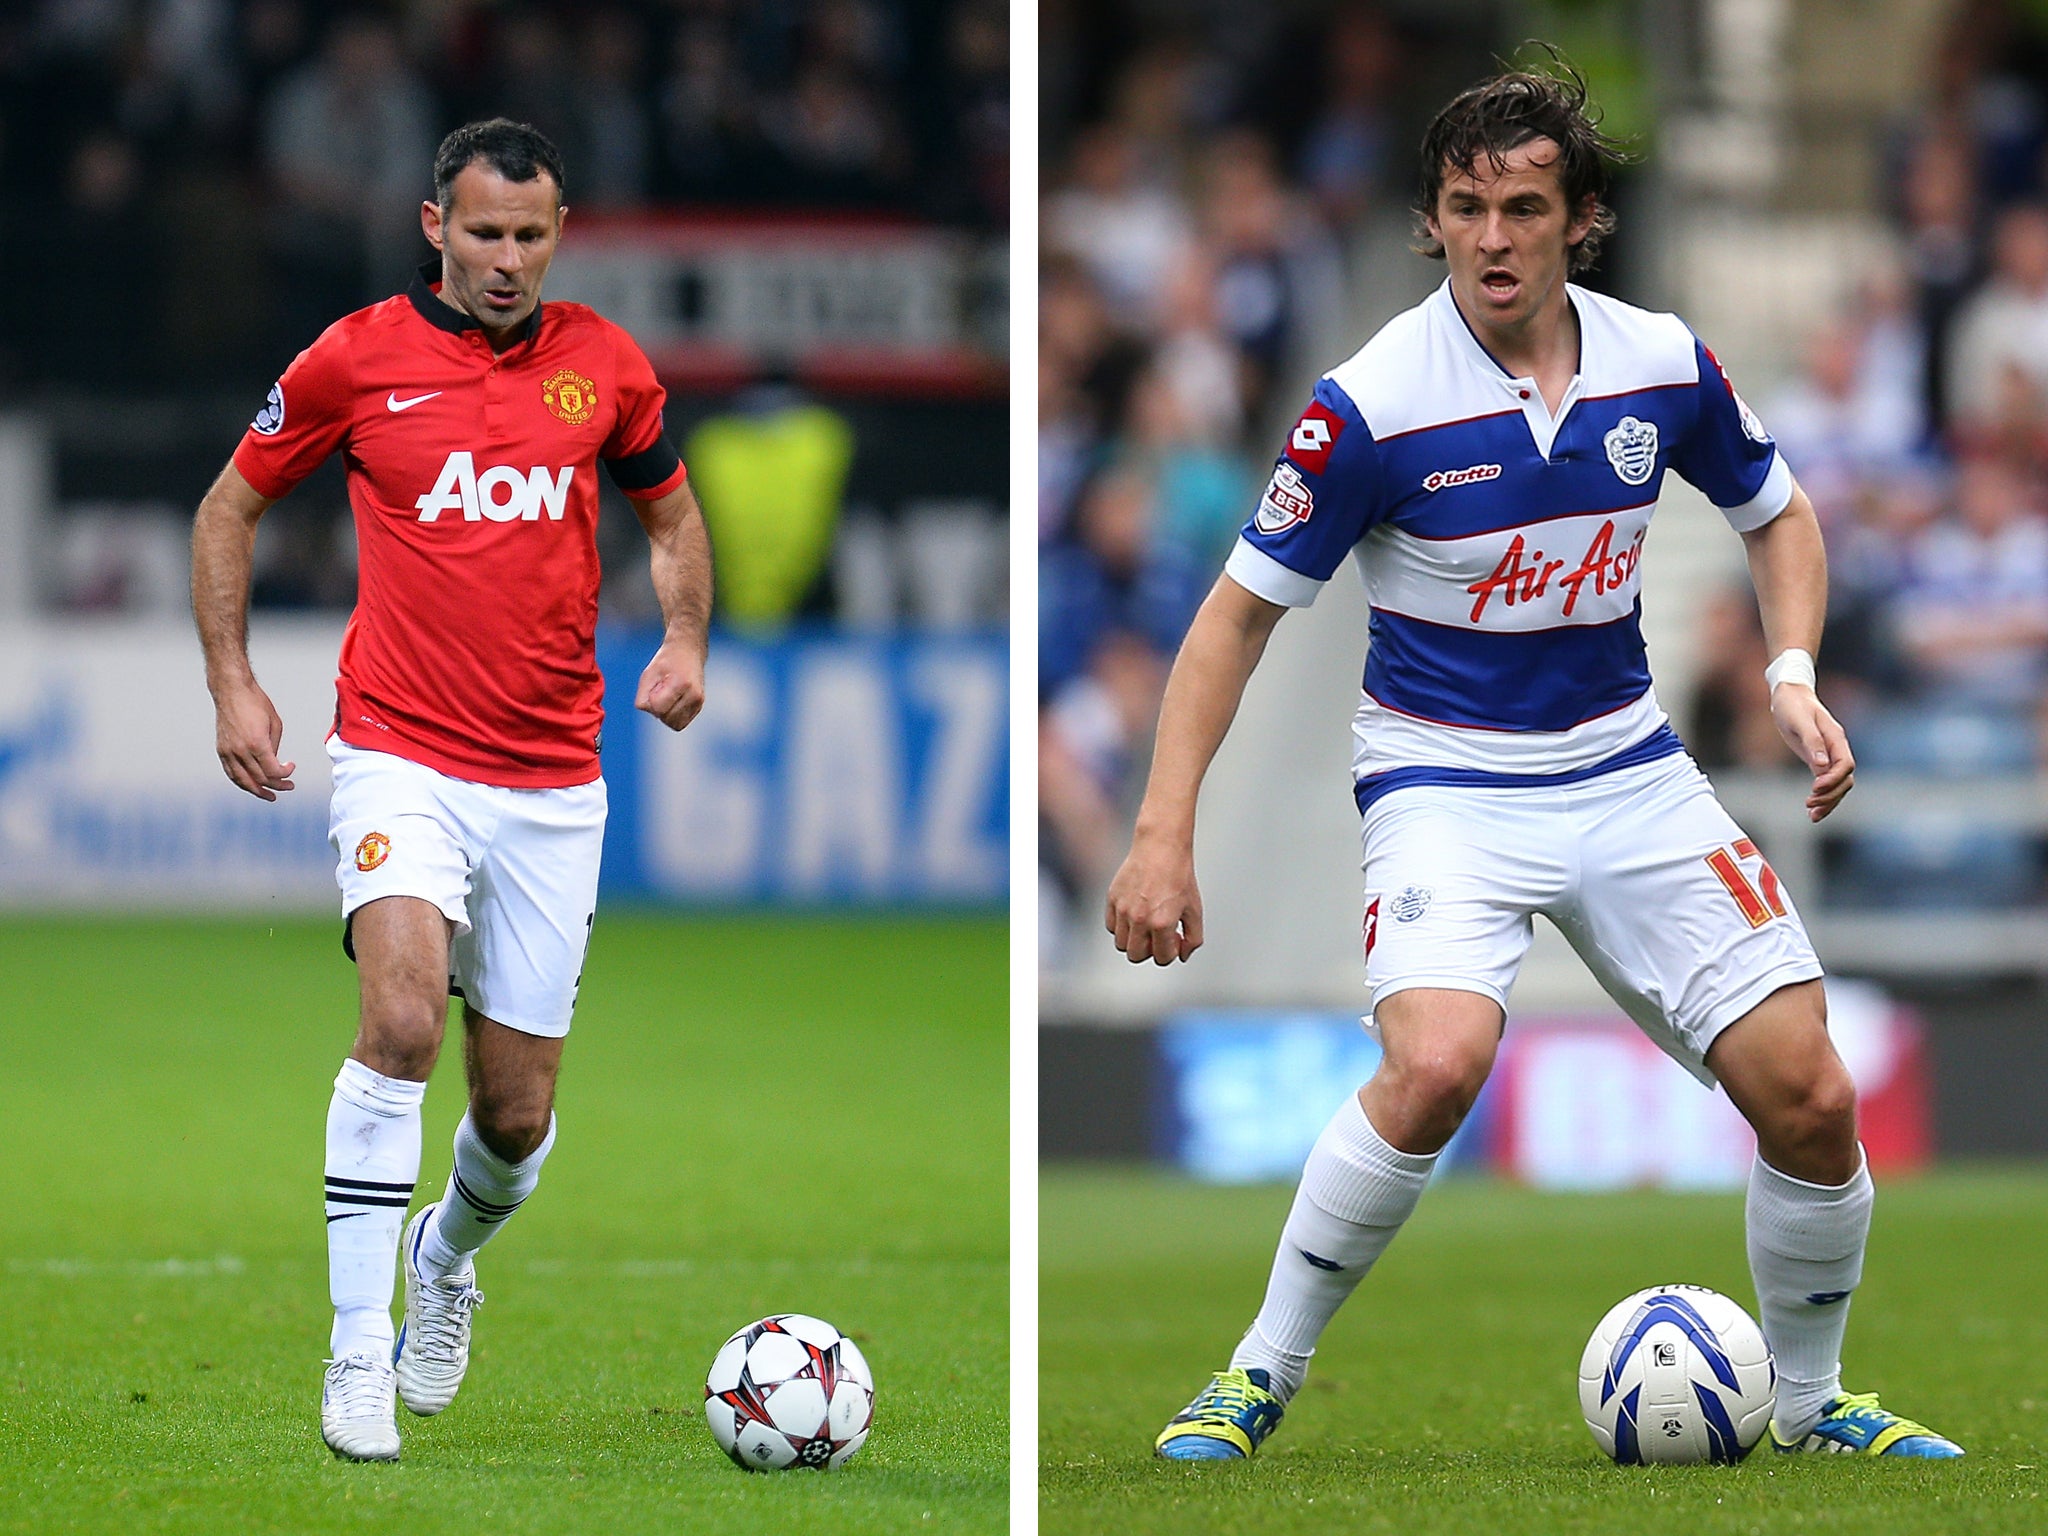 Ryan Giggs has been labelled as a "wrong'un" by QPR midfielder Joey Barton